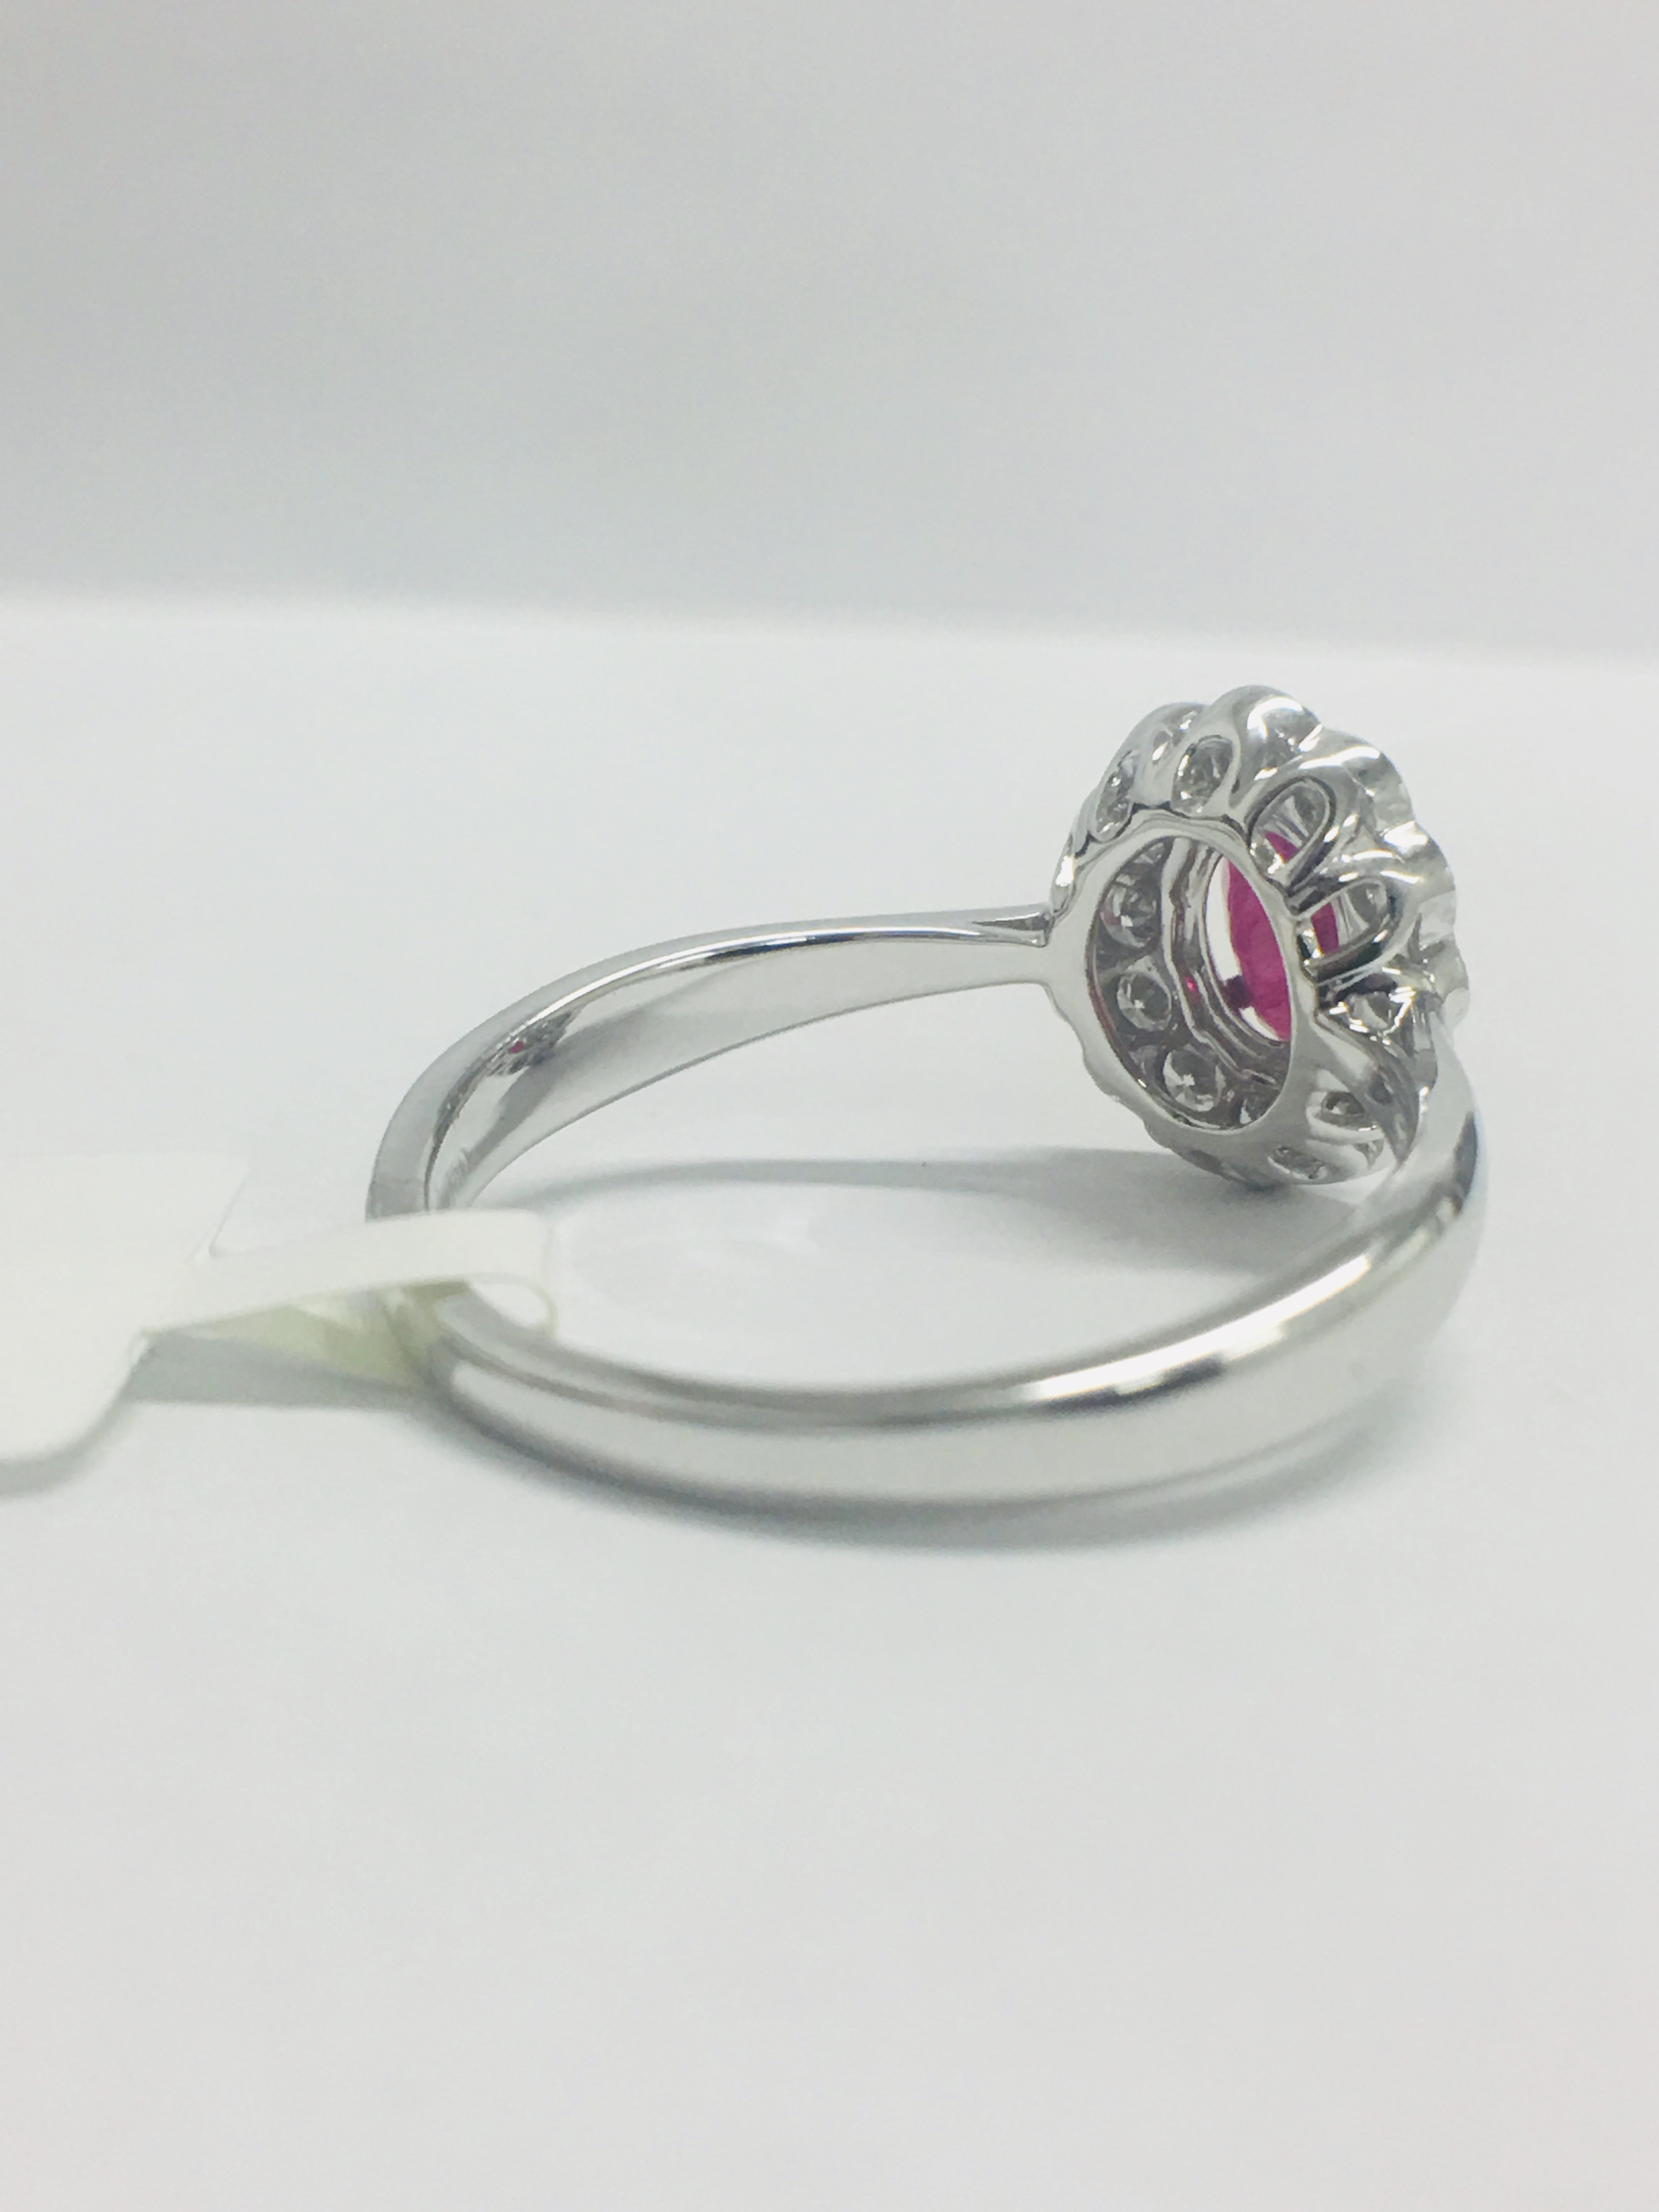 18Ct White Gold Ruby Diamond Cluster Ring, - Image 6 of 10